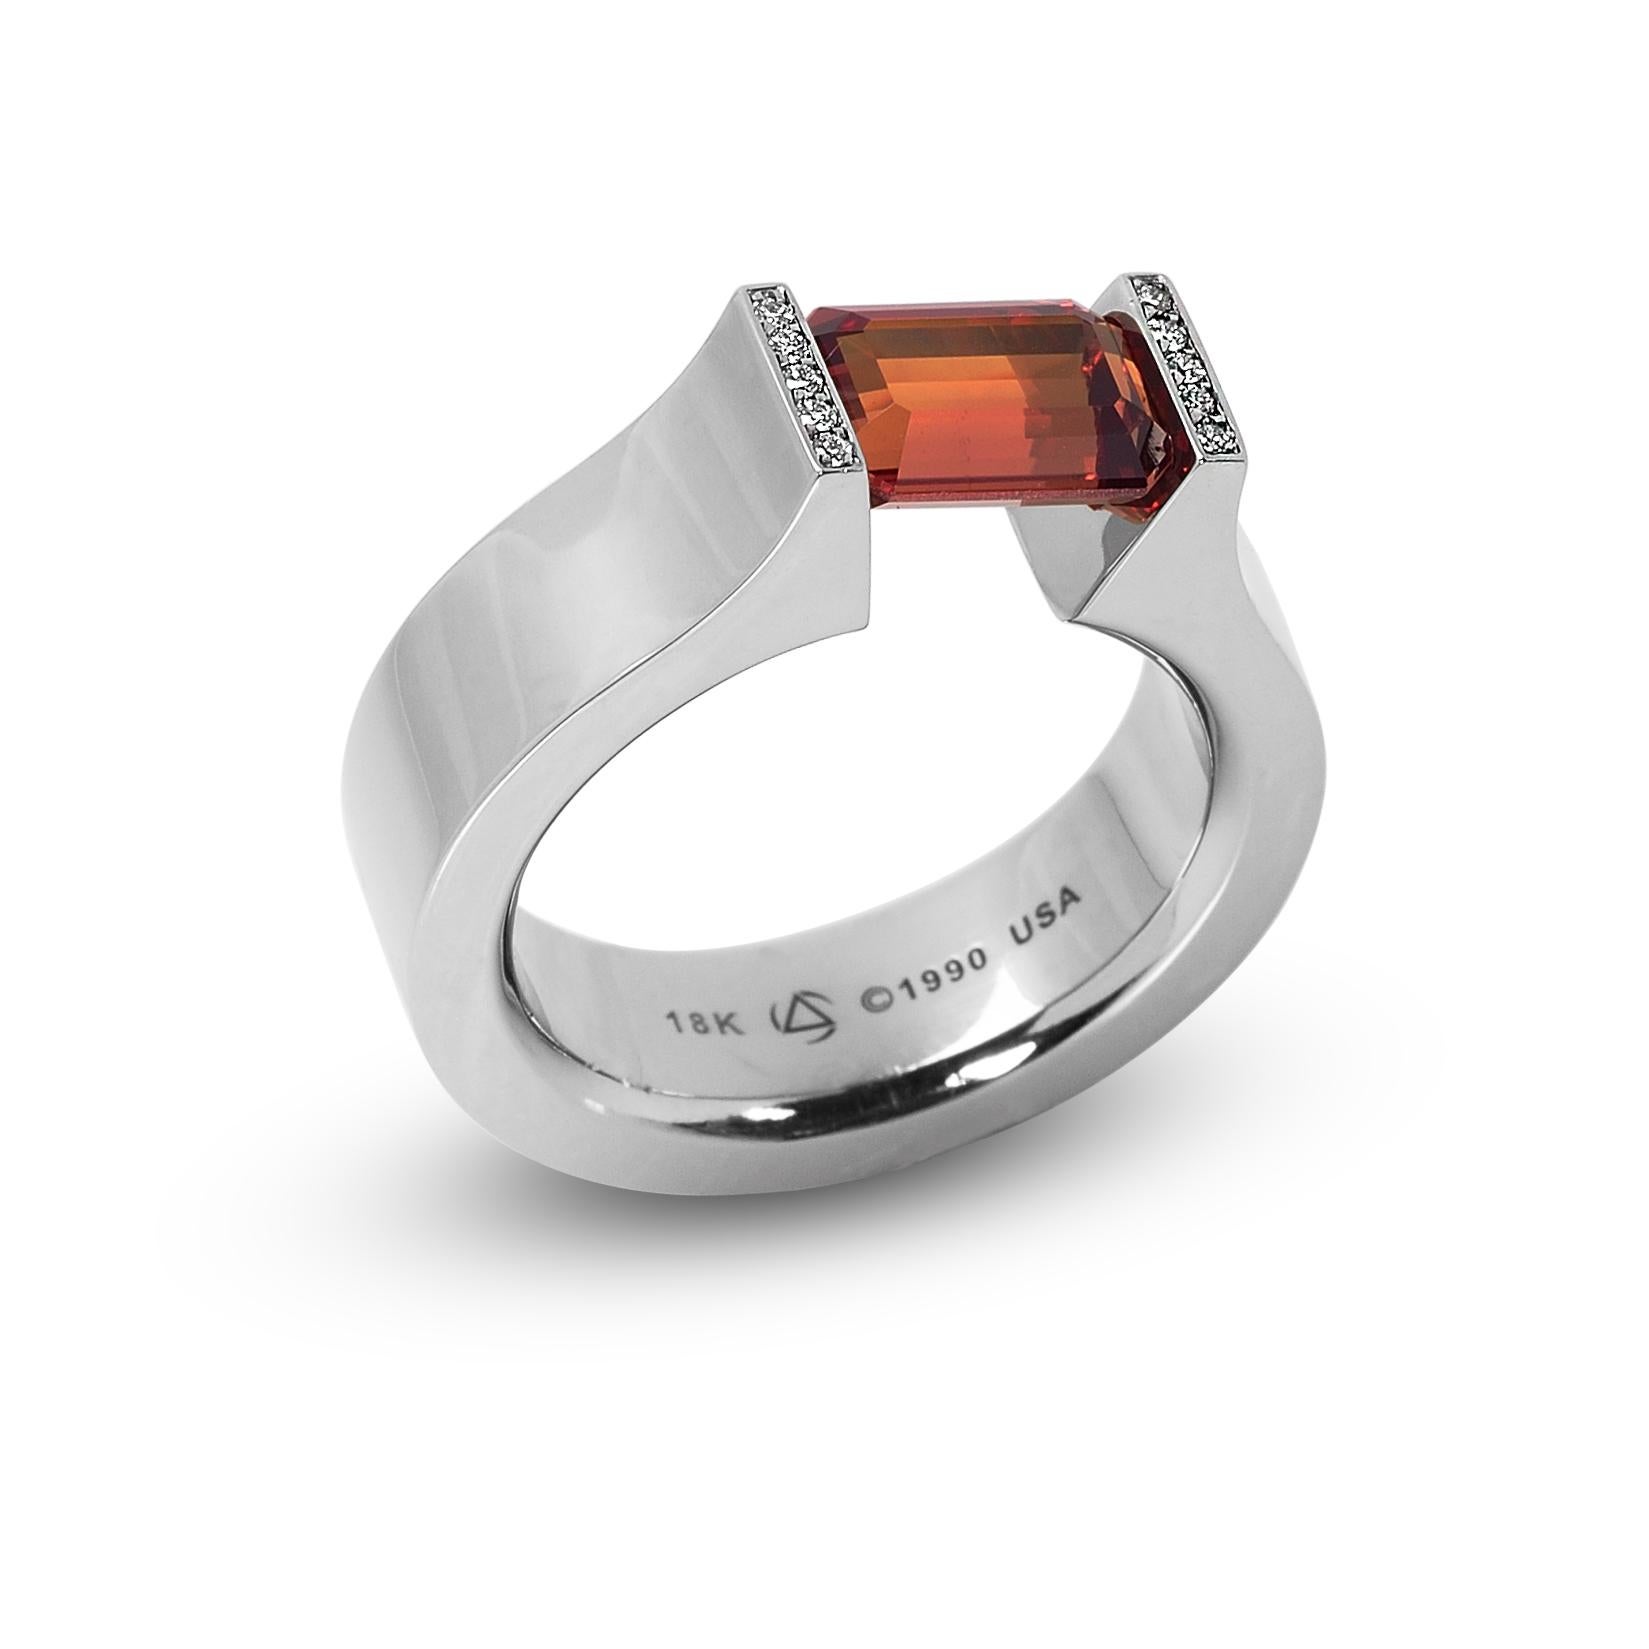 The Steven Kretchmer Hard Omega ring with pave lips and a tension-set orange sapphire is handcrafted in 18K white gold with a shiny finish. The 2.27 ct. emerald cut sapphire is a deep and fiery citrusy orange. The setting features five F/VS diamond